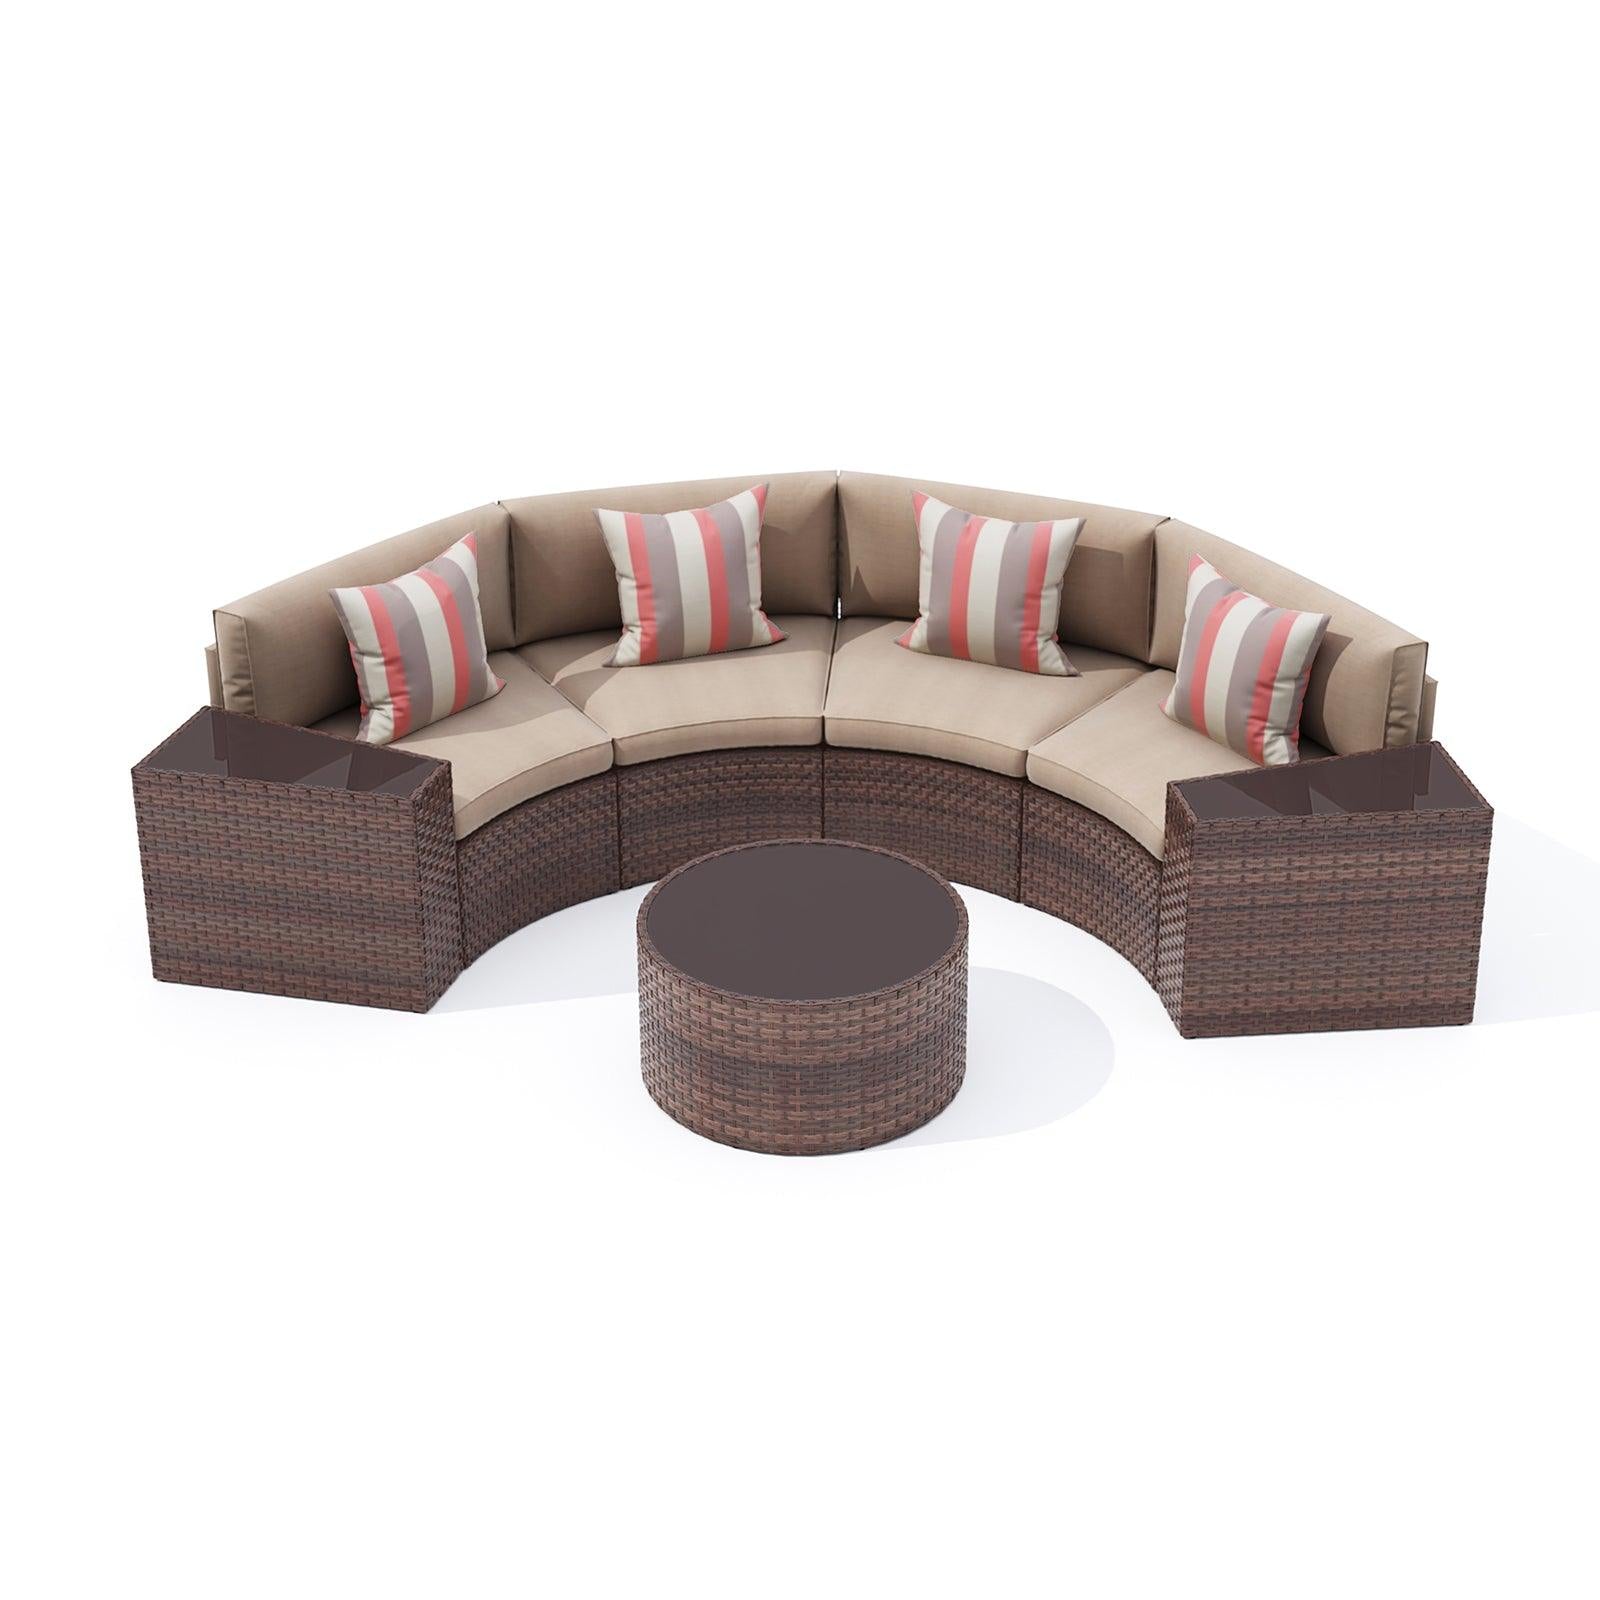 Halo 7-pc. Outdoor Half-Moon Sectional Set sale